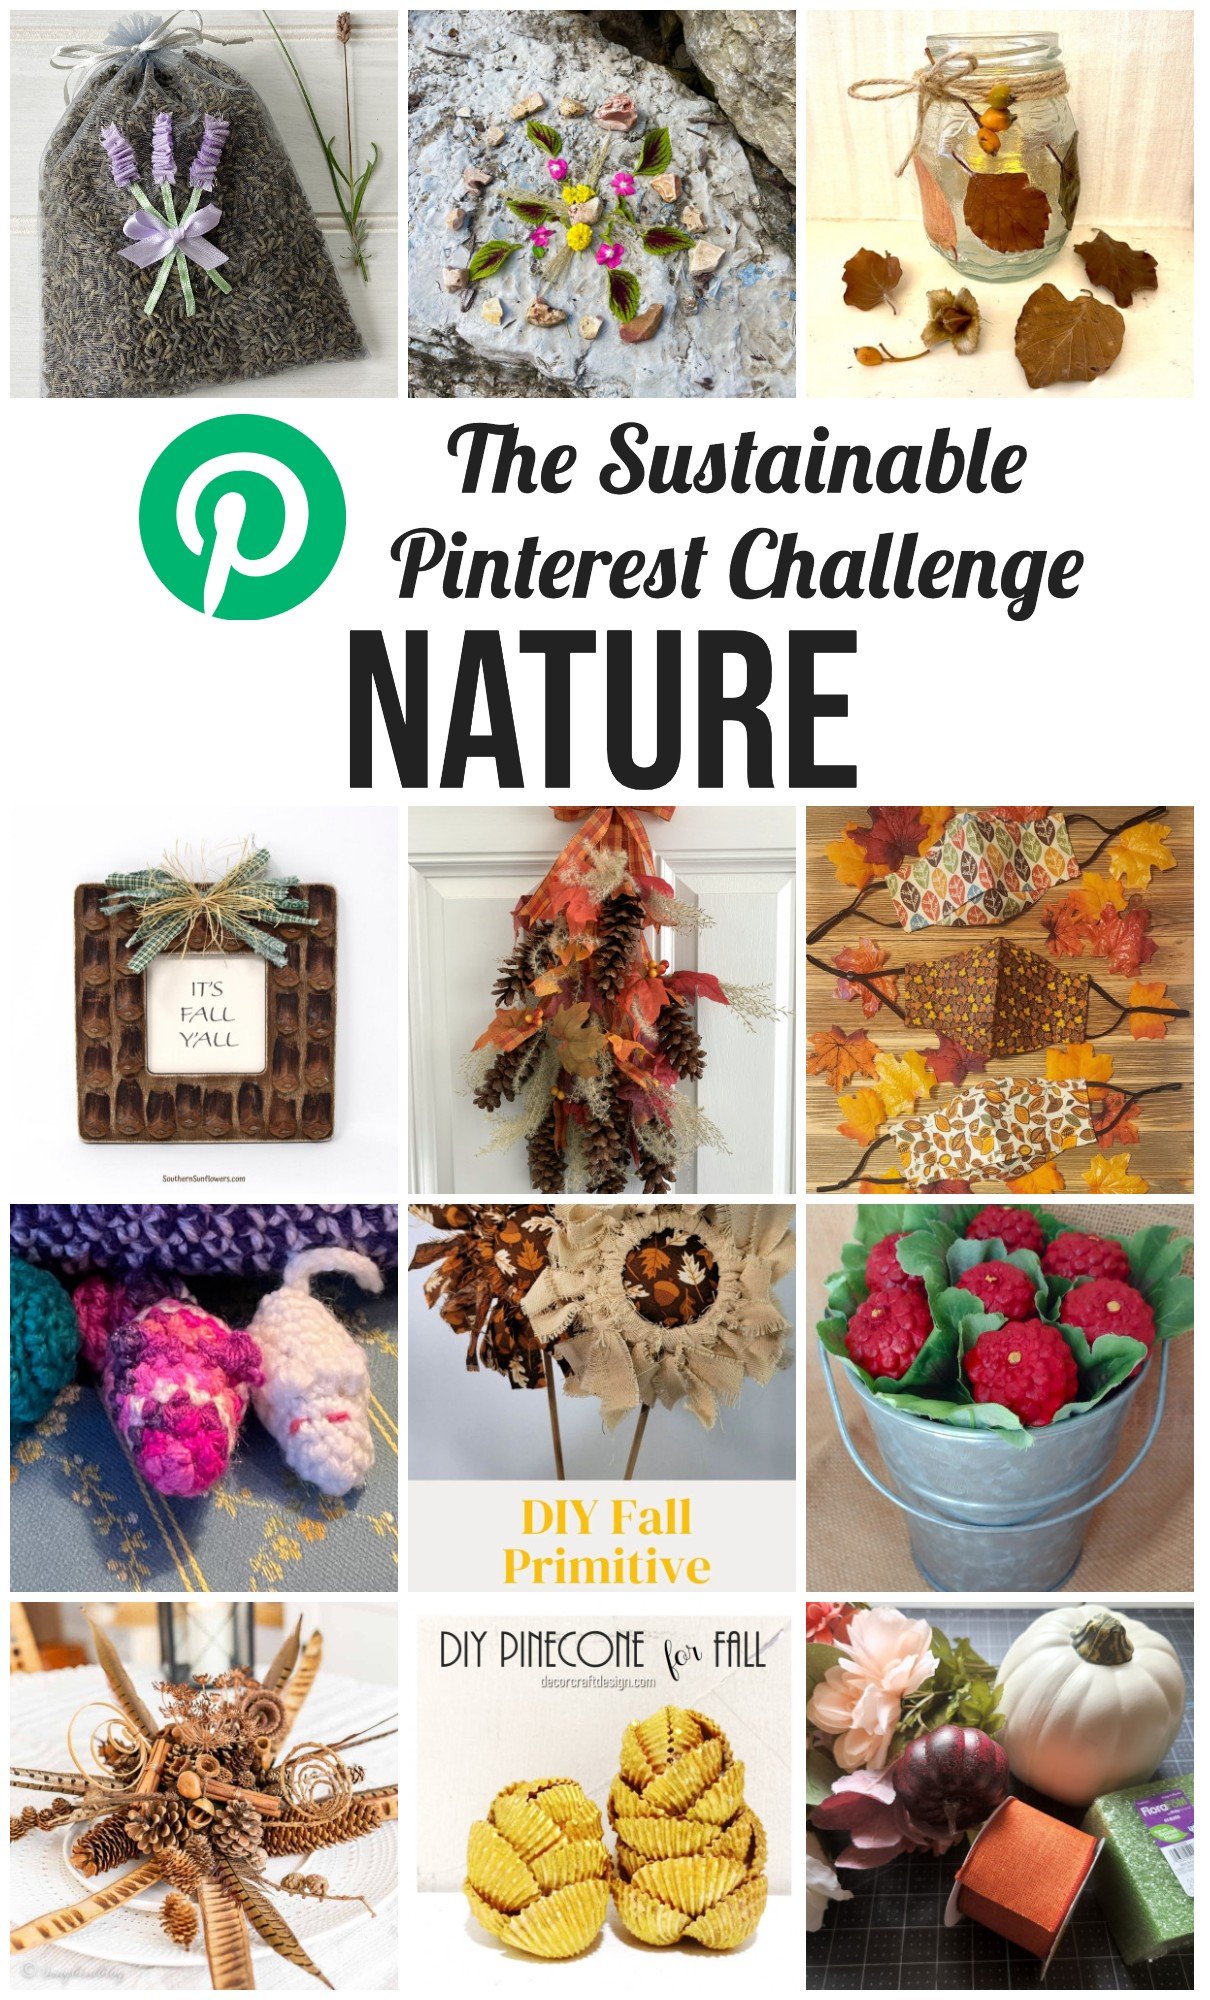 A collage of nature inspired crafts